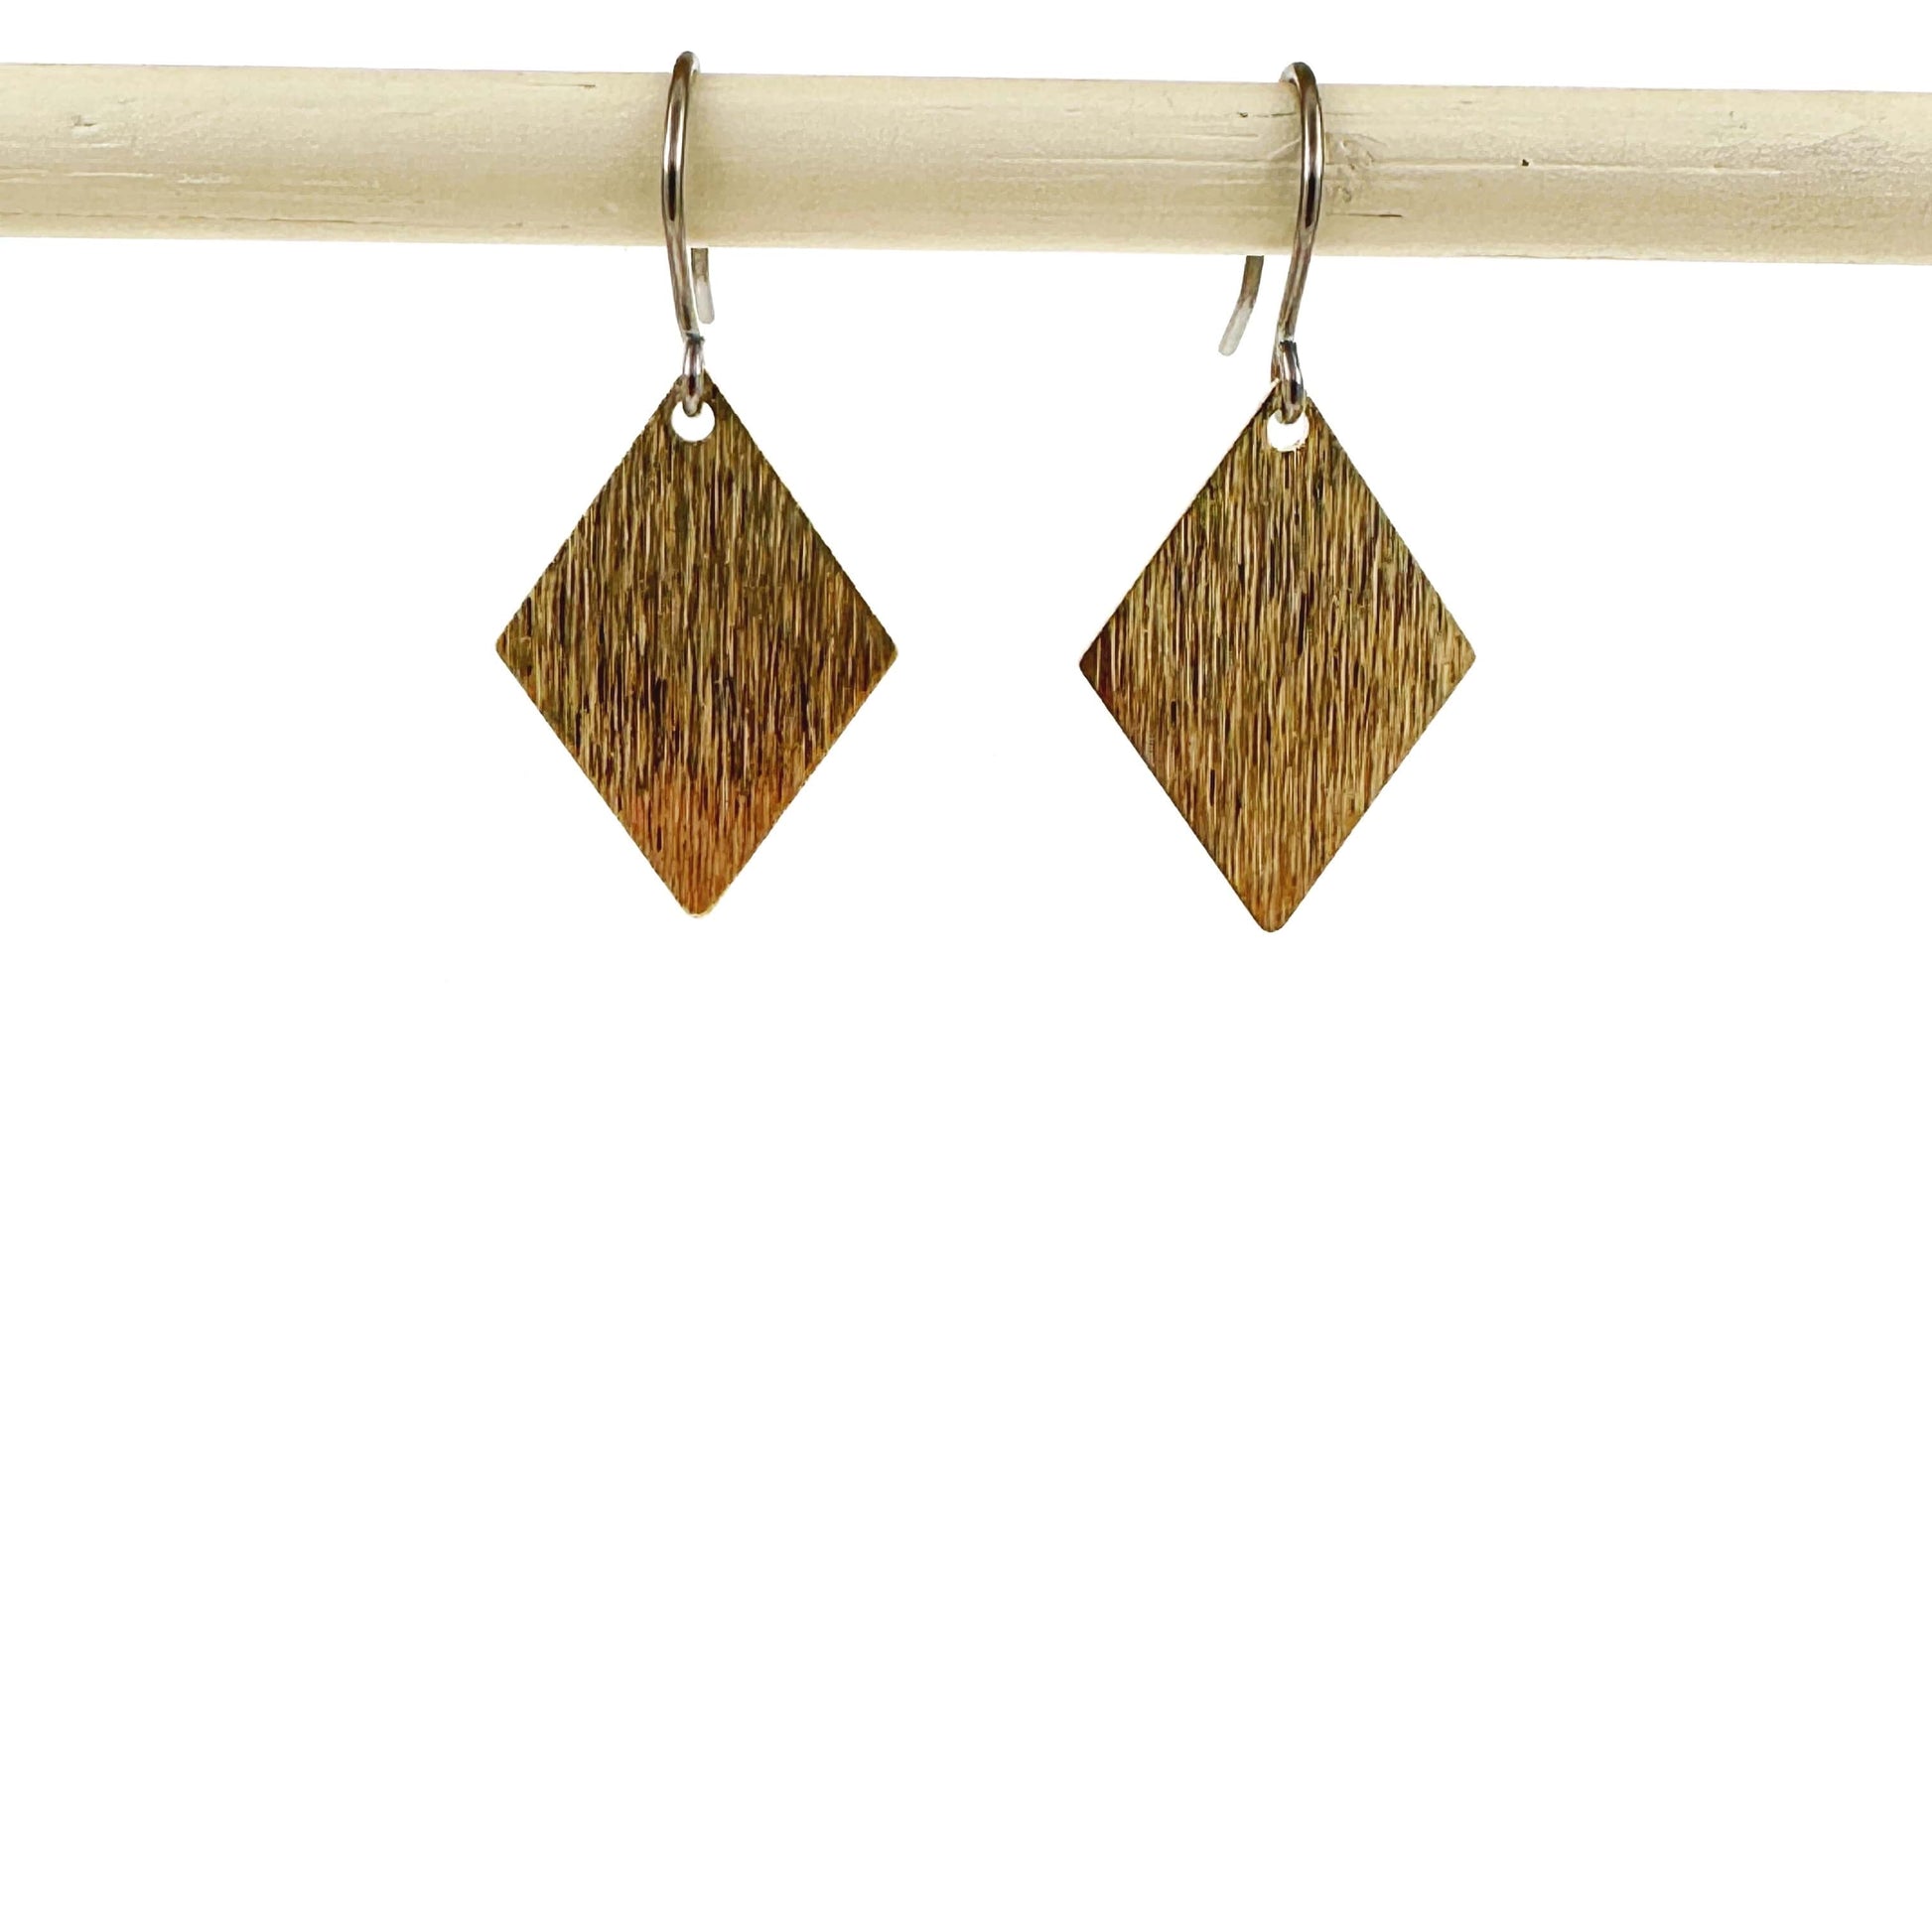 Brushed Rhombus Golden Earrings. Brushed gold shape "rhombus" is made of brass and has a deep definition. Minimal. 